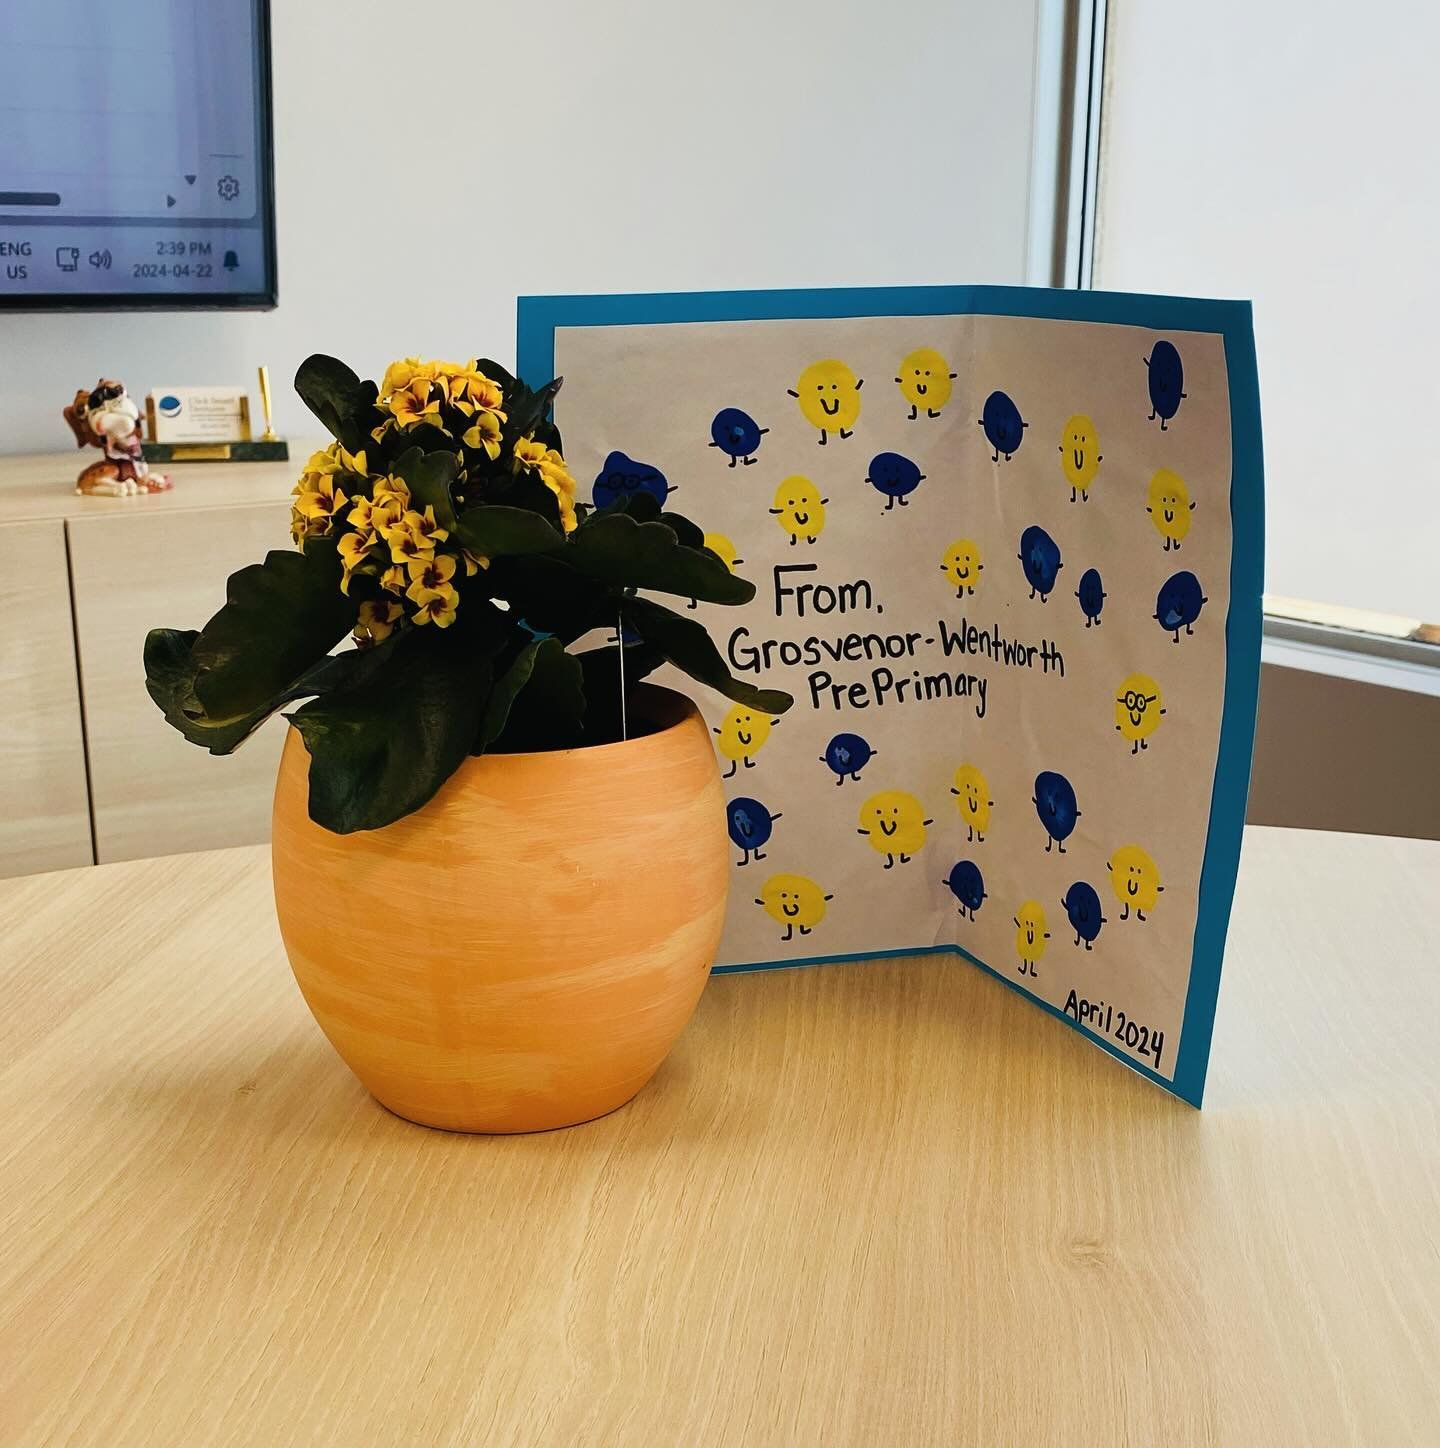 It&rsquo;s our first day and we got a visit and this amazing card and gift from the Pre-Primary class at Grosvenor-Wentworth!